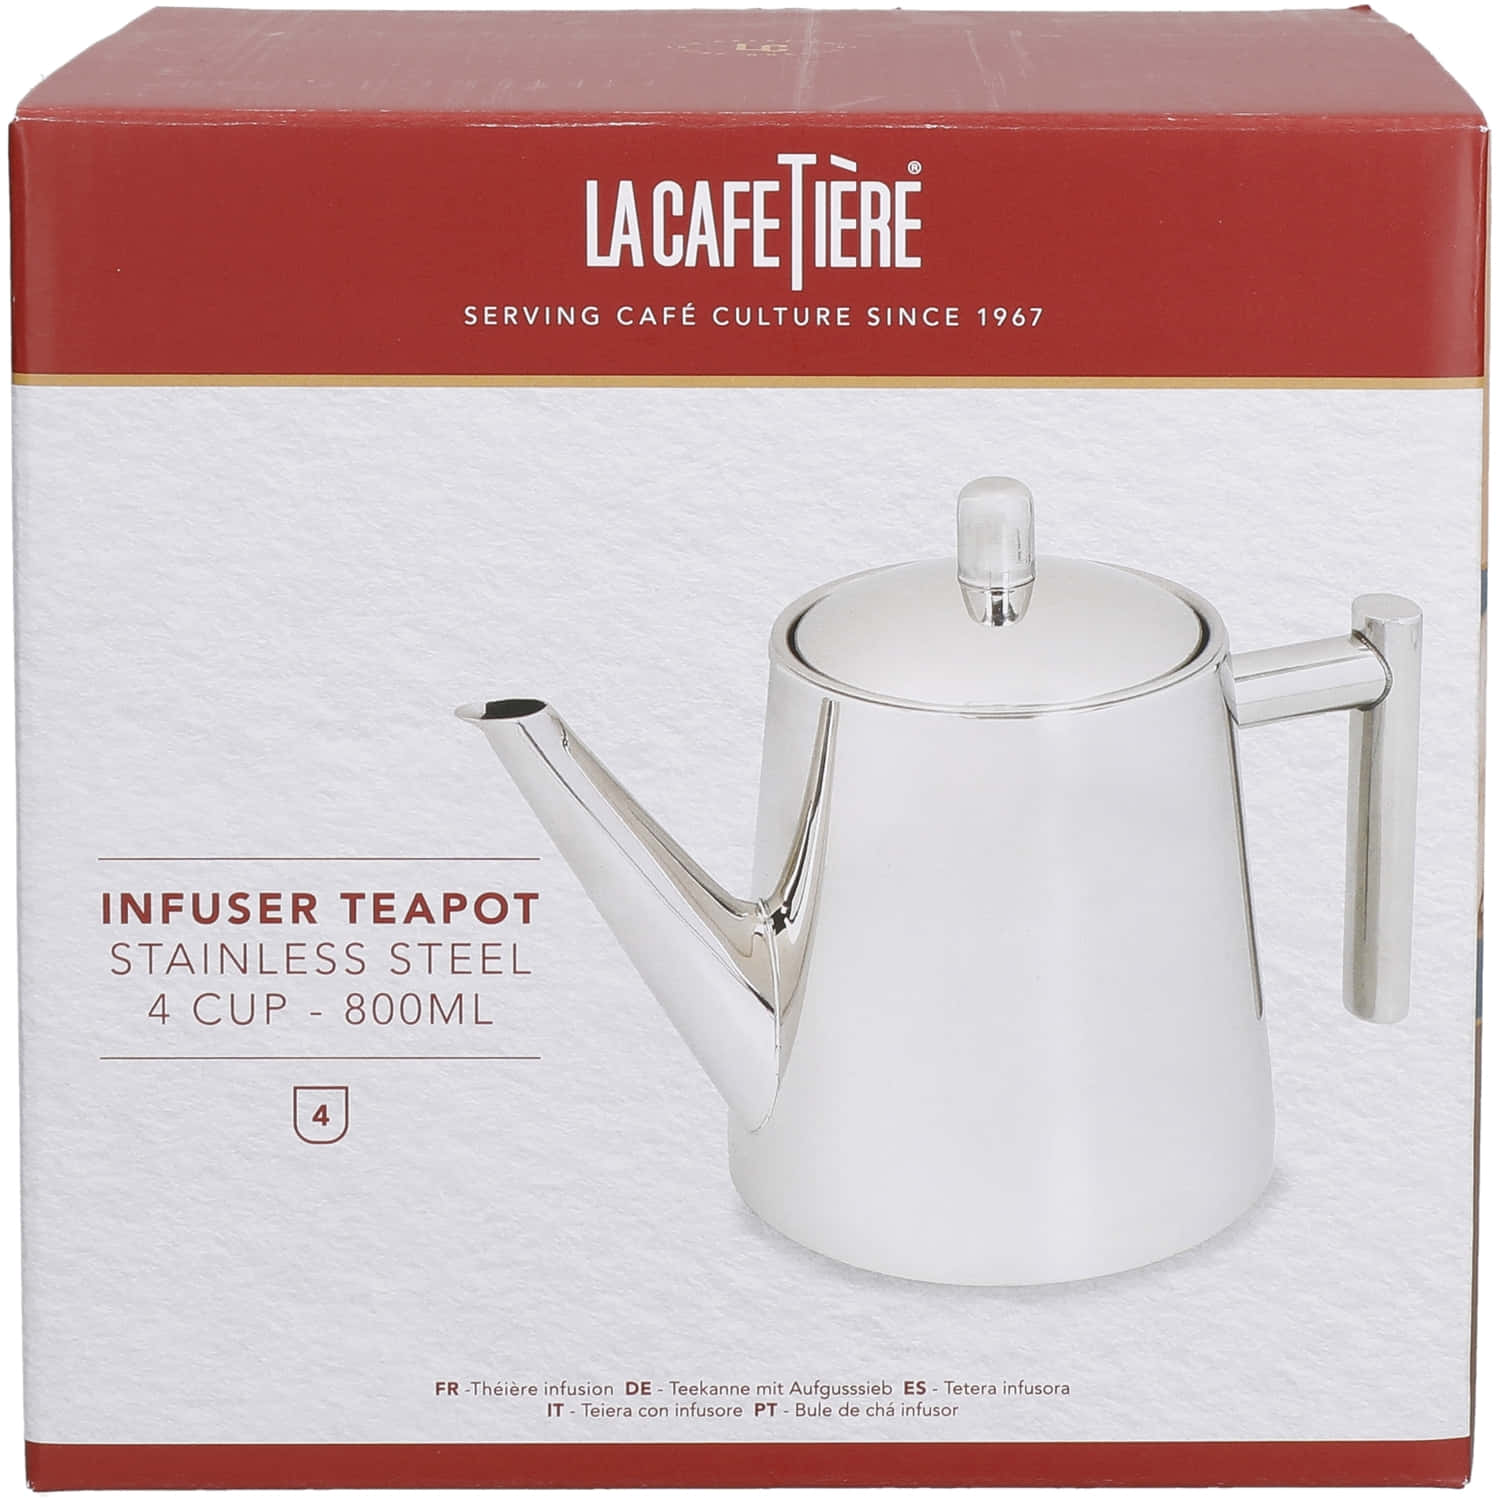 La Cafetière Stainless Steel Infuser Teapot Four Cup